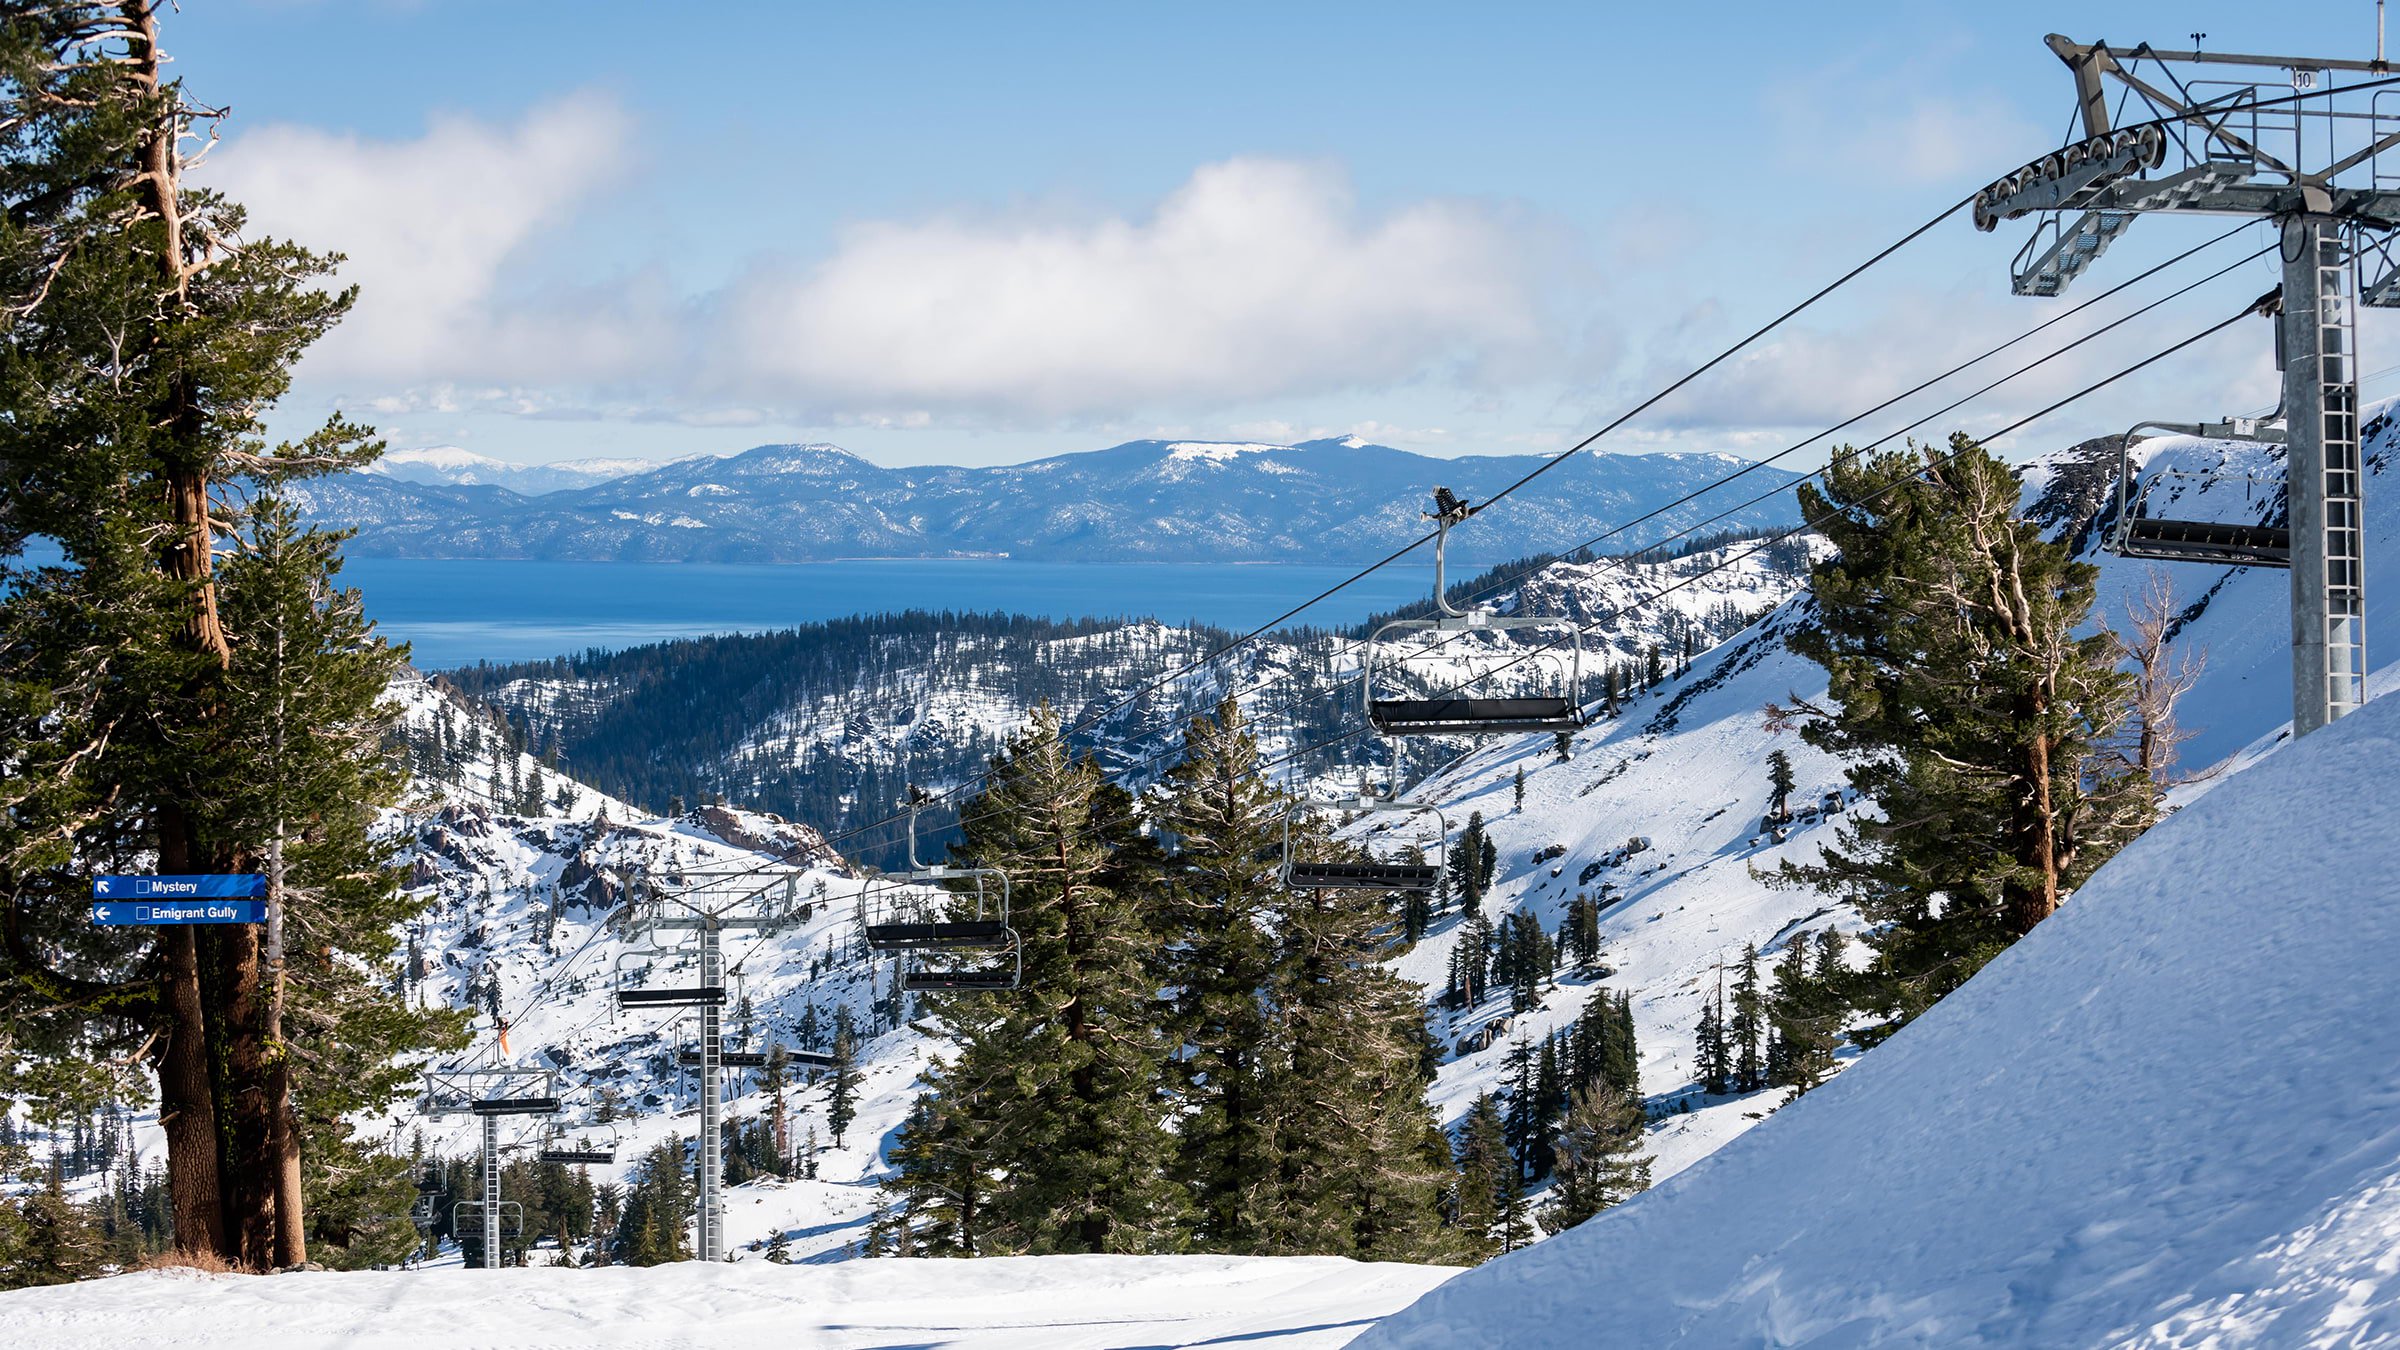 View of Lake Tahoe and Gold Coast Chair on October 27, 2021 - two days before opening day